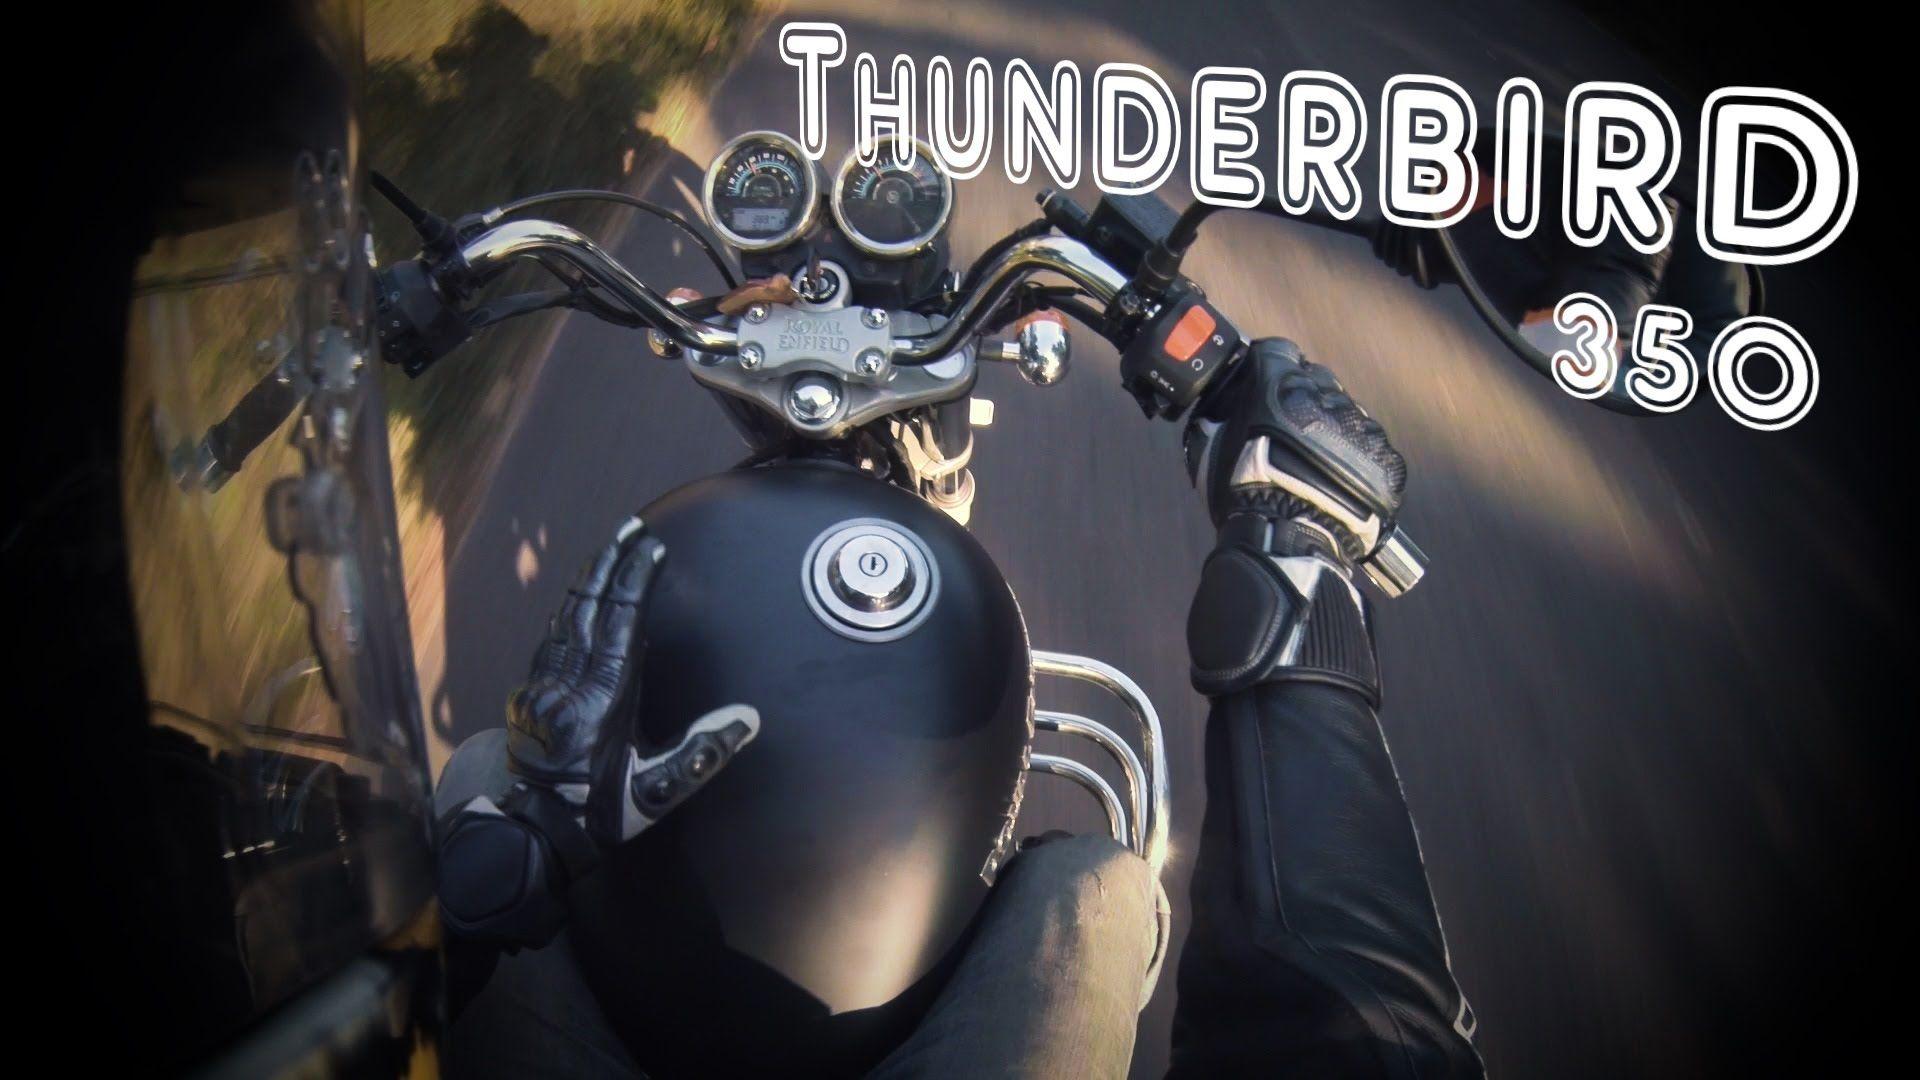 Royal Enfield Thunderbird 350. First Ride Review